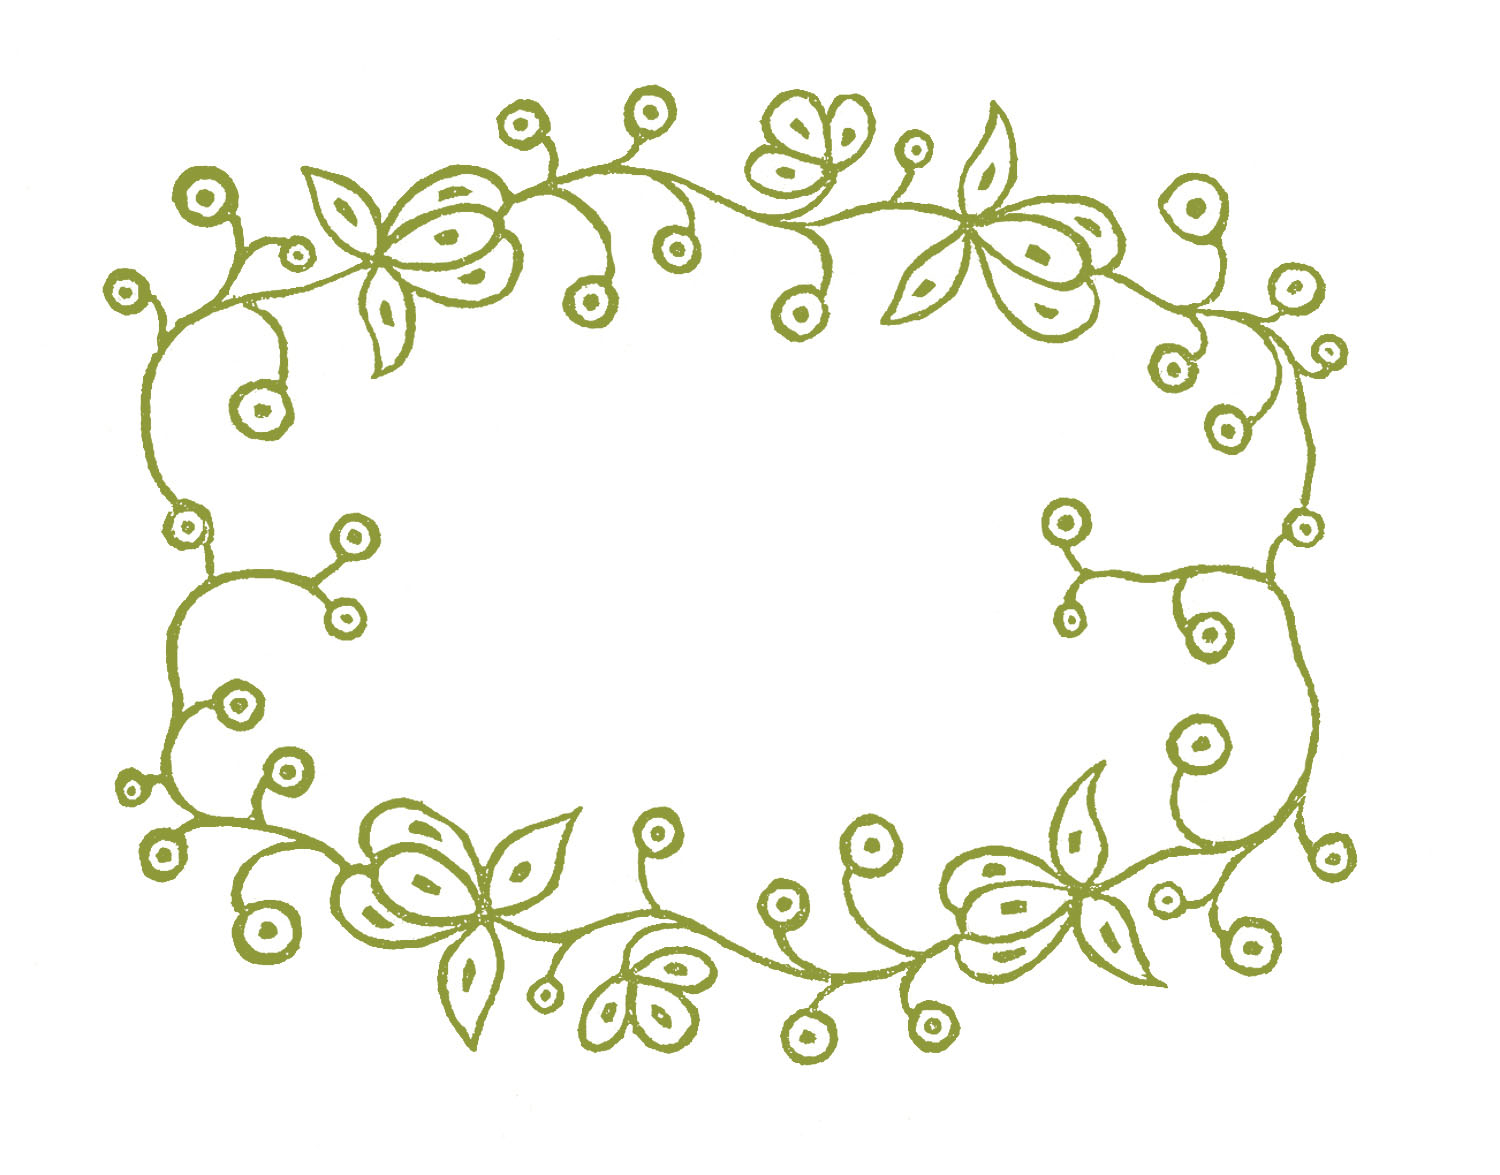 Embroidery On Paper Free Patterns Royalty Free Images Embroidery Patterns Floral Frames The